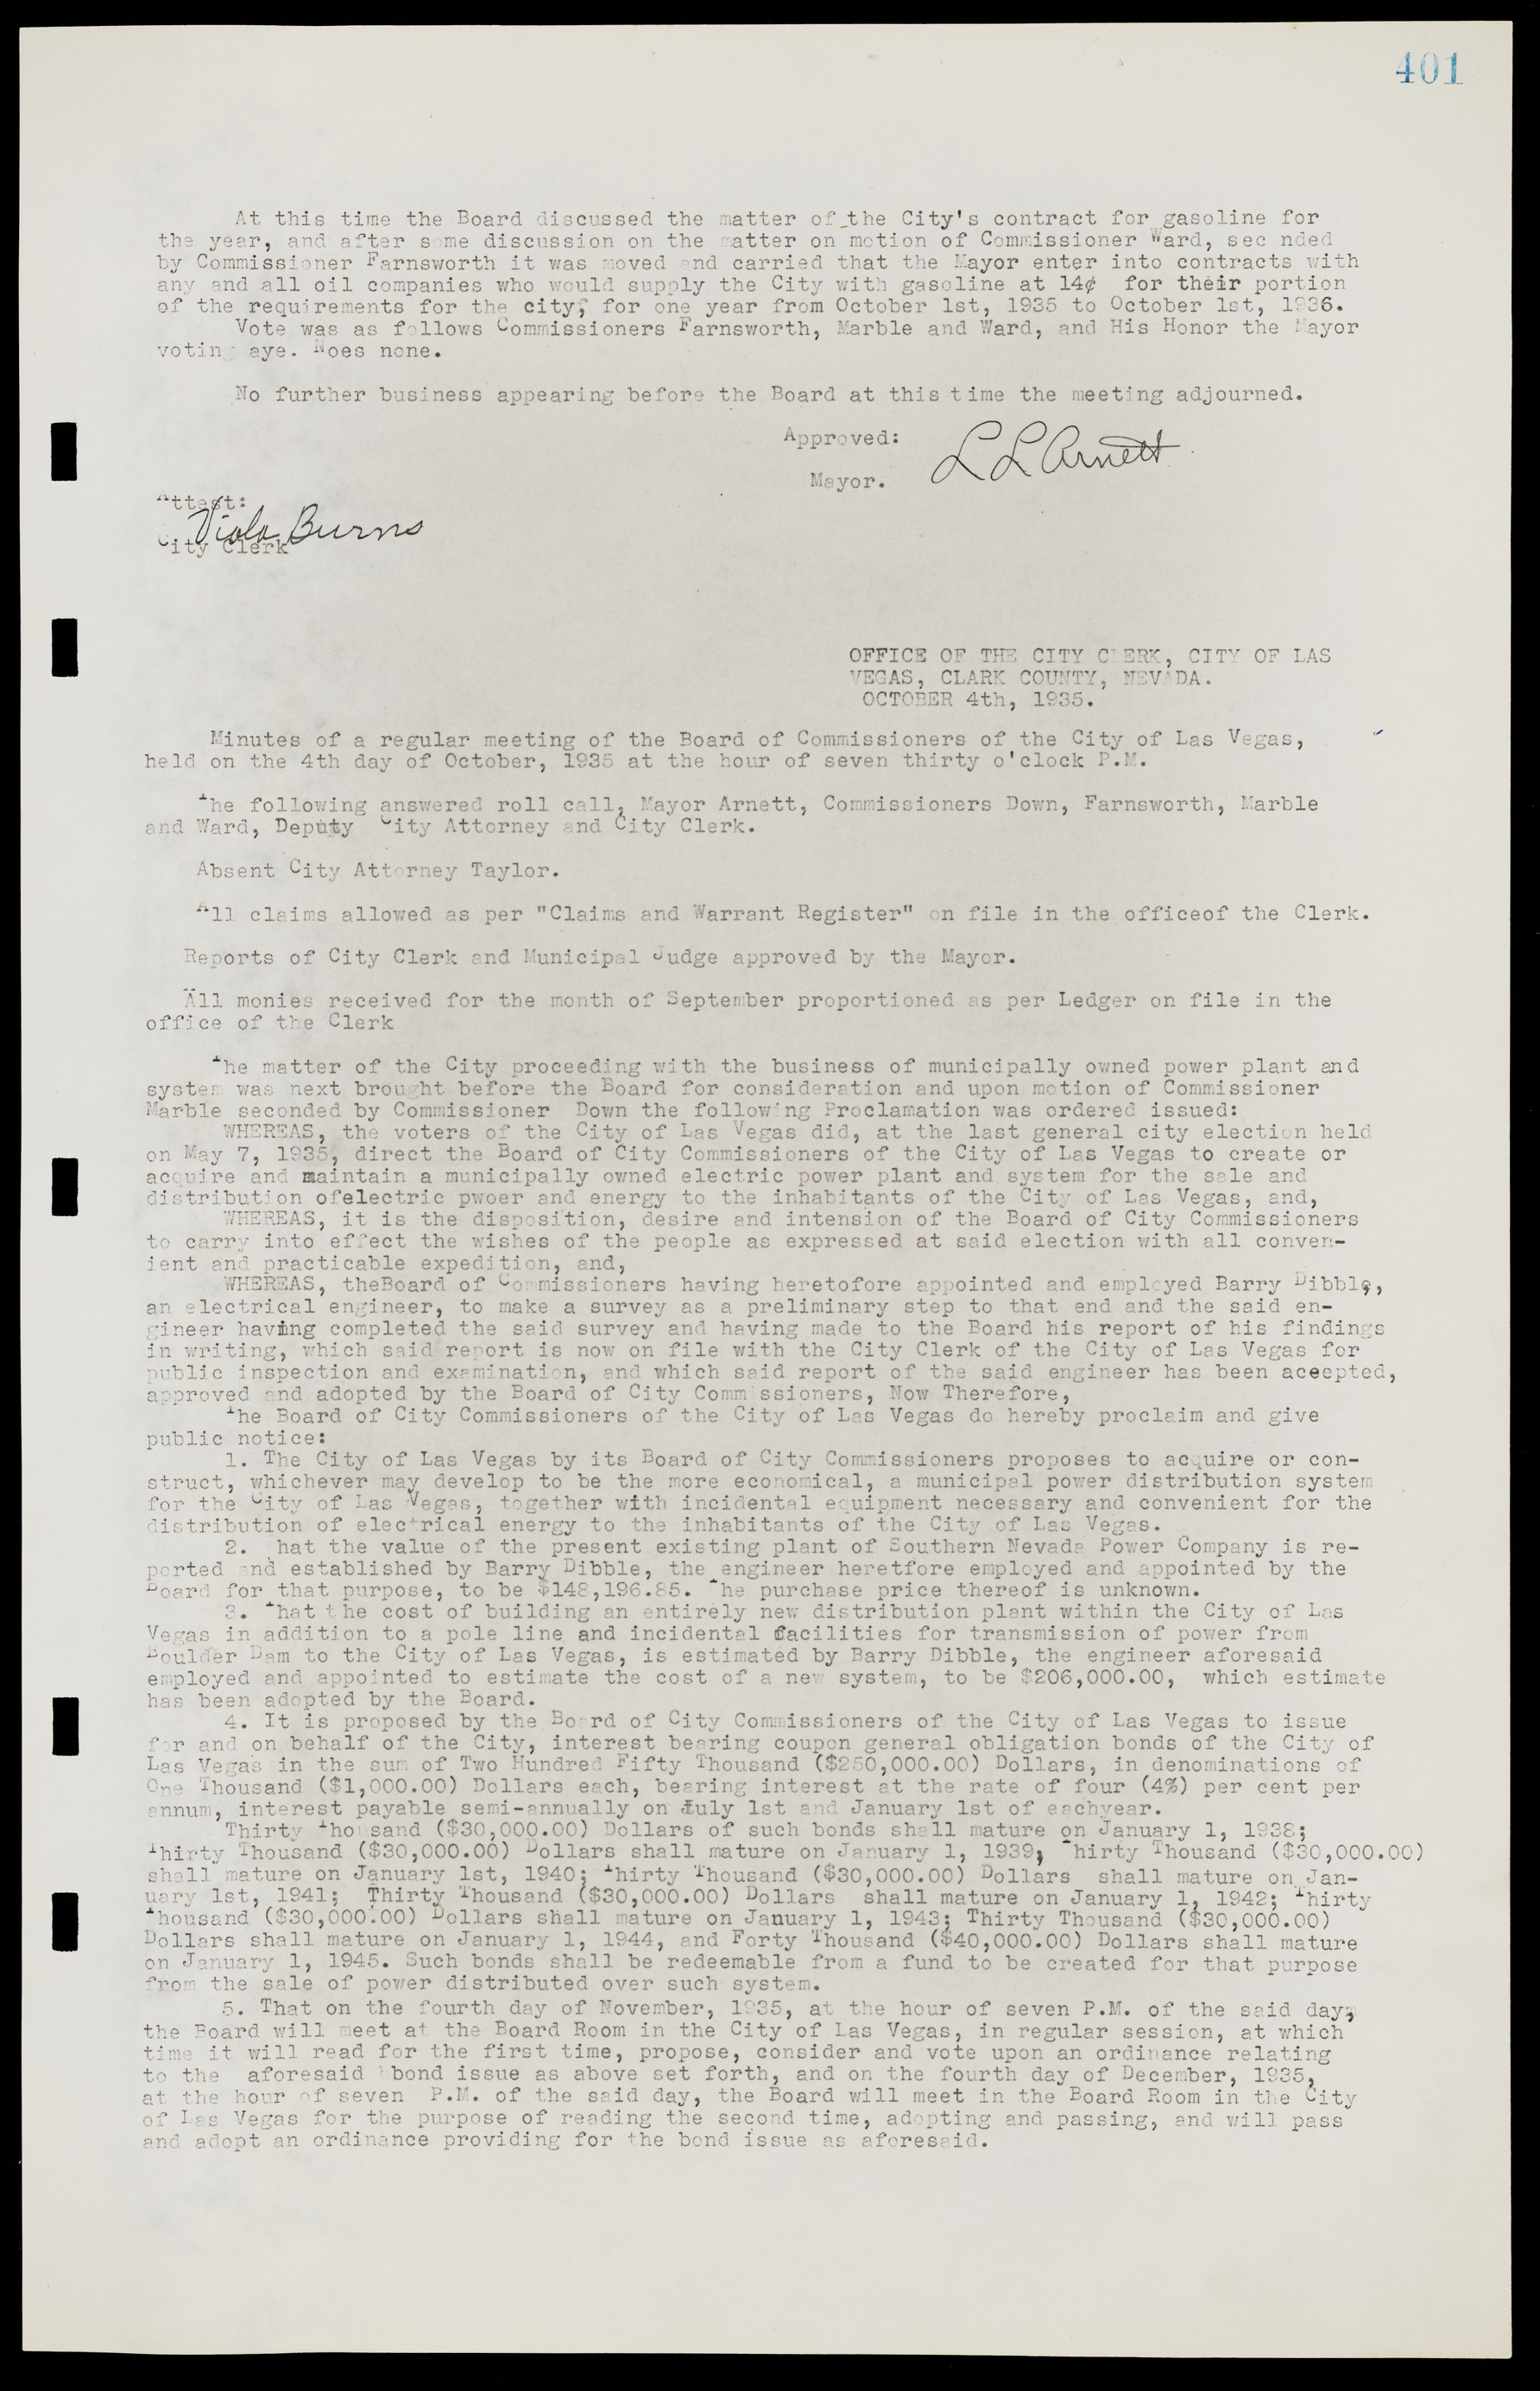 Las Vegas City Commission Minutes, May 14, 1929 to February 11, 1937, lvc000003-408